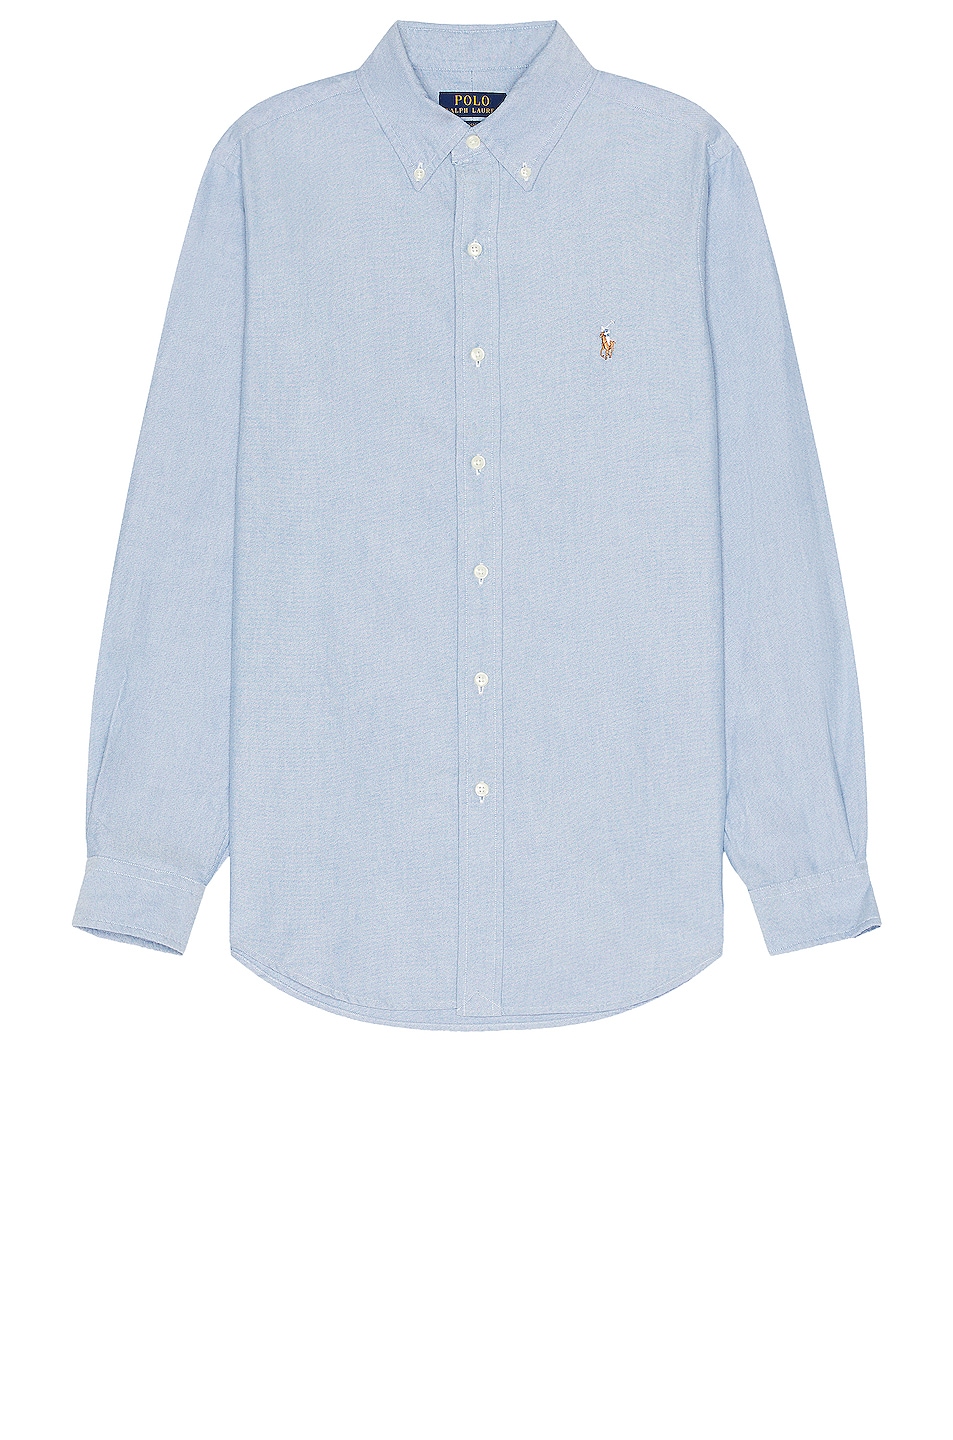 Image 1 of Polo Ralph Lauren Oxford Sport Shirt in Blue